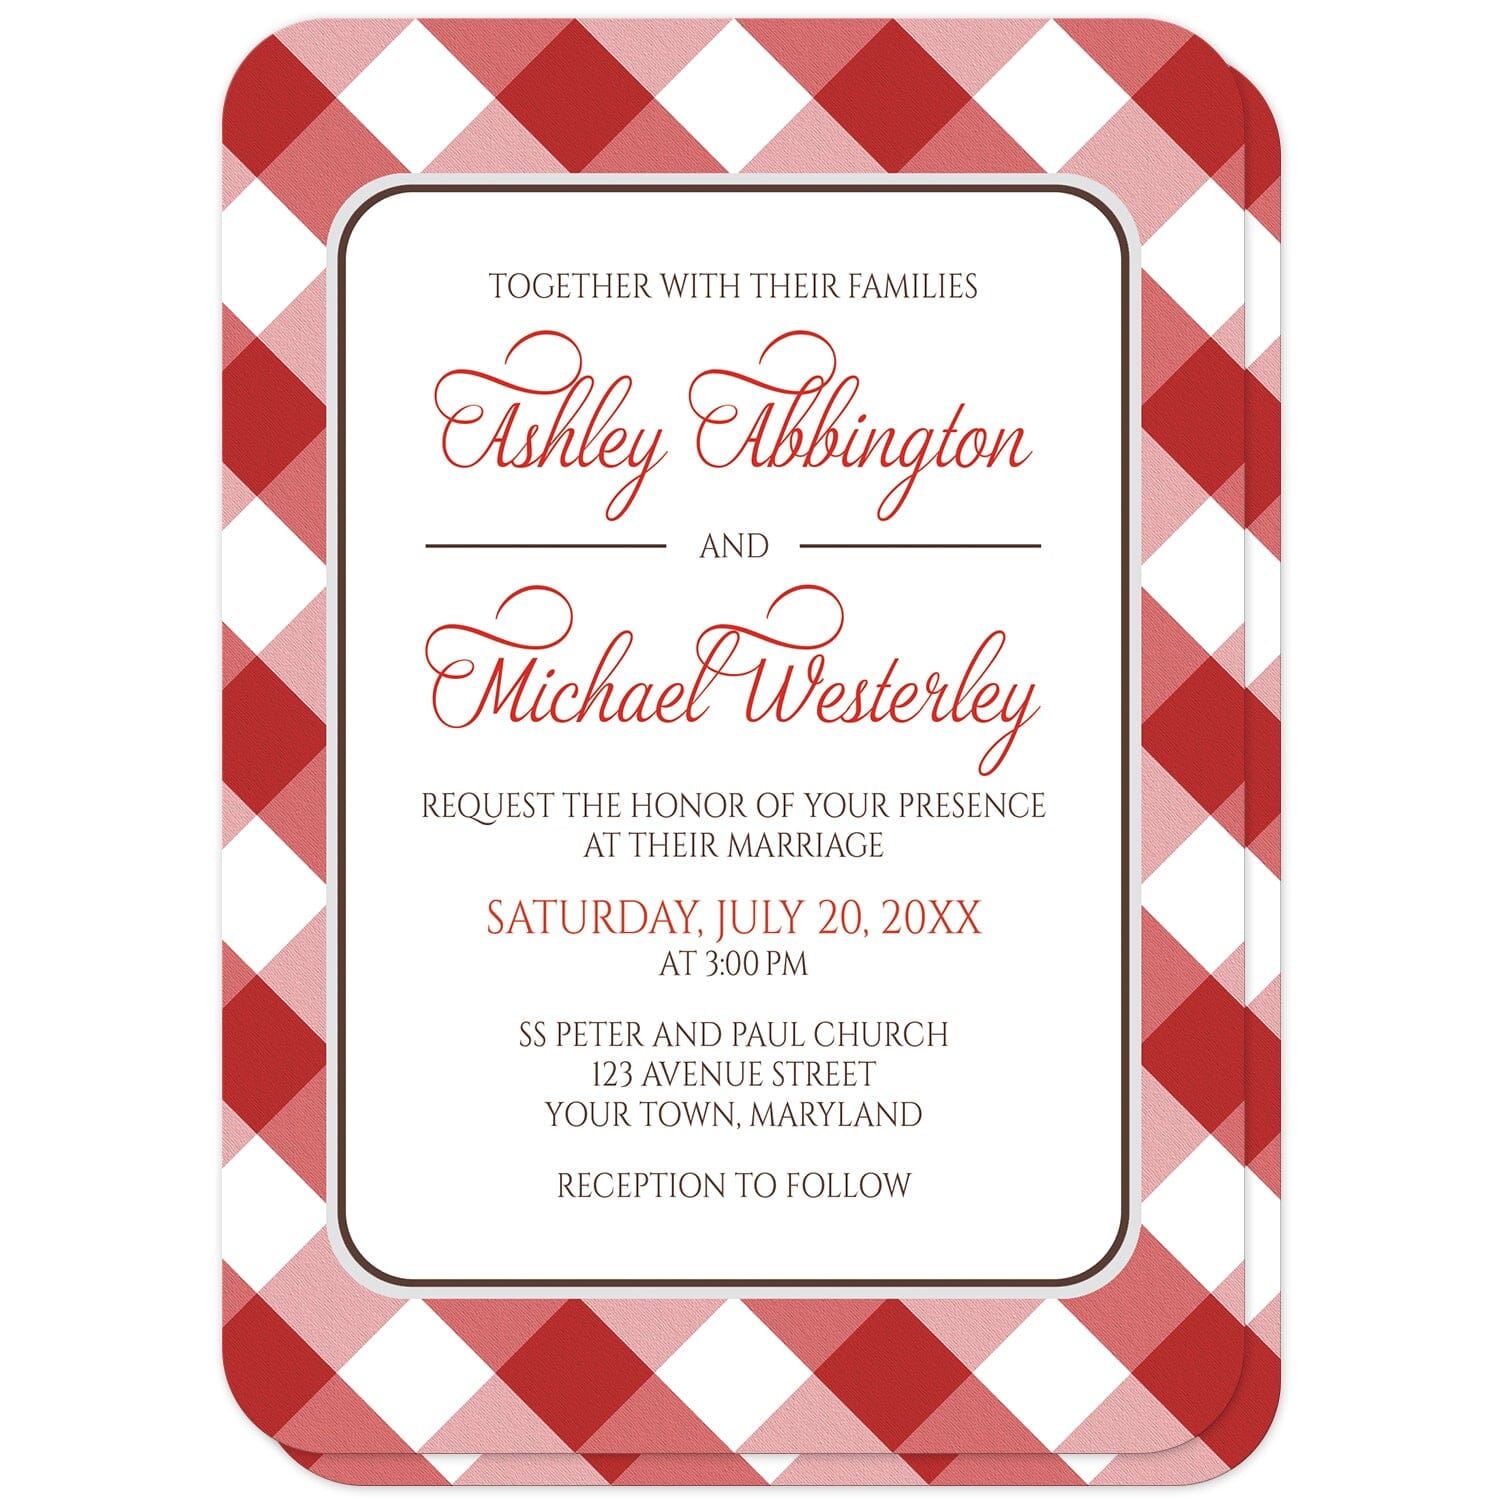 Red Gingham Wedding Invitations (with rounded corners) at Artistically Invited. Red gingham wedding invitations with your personalized wedding ceremony details custom printed in red and brown inside a white rectangular area outlined in brown and light gray. The background design is a diagonal red and white gingham check pattern which is also printed on the back side. 